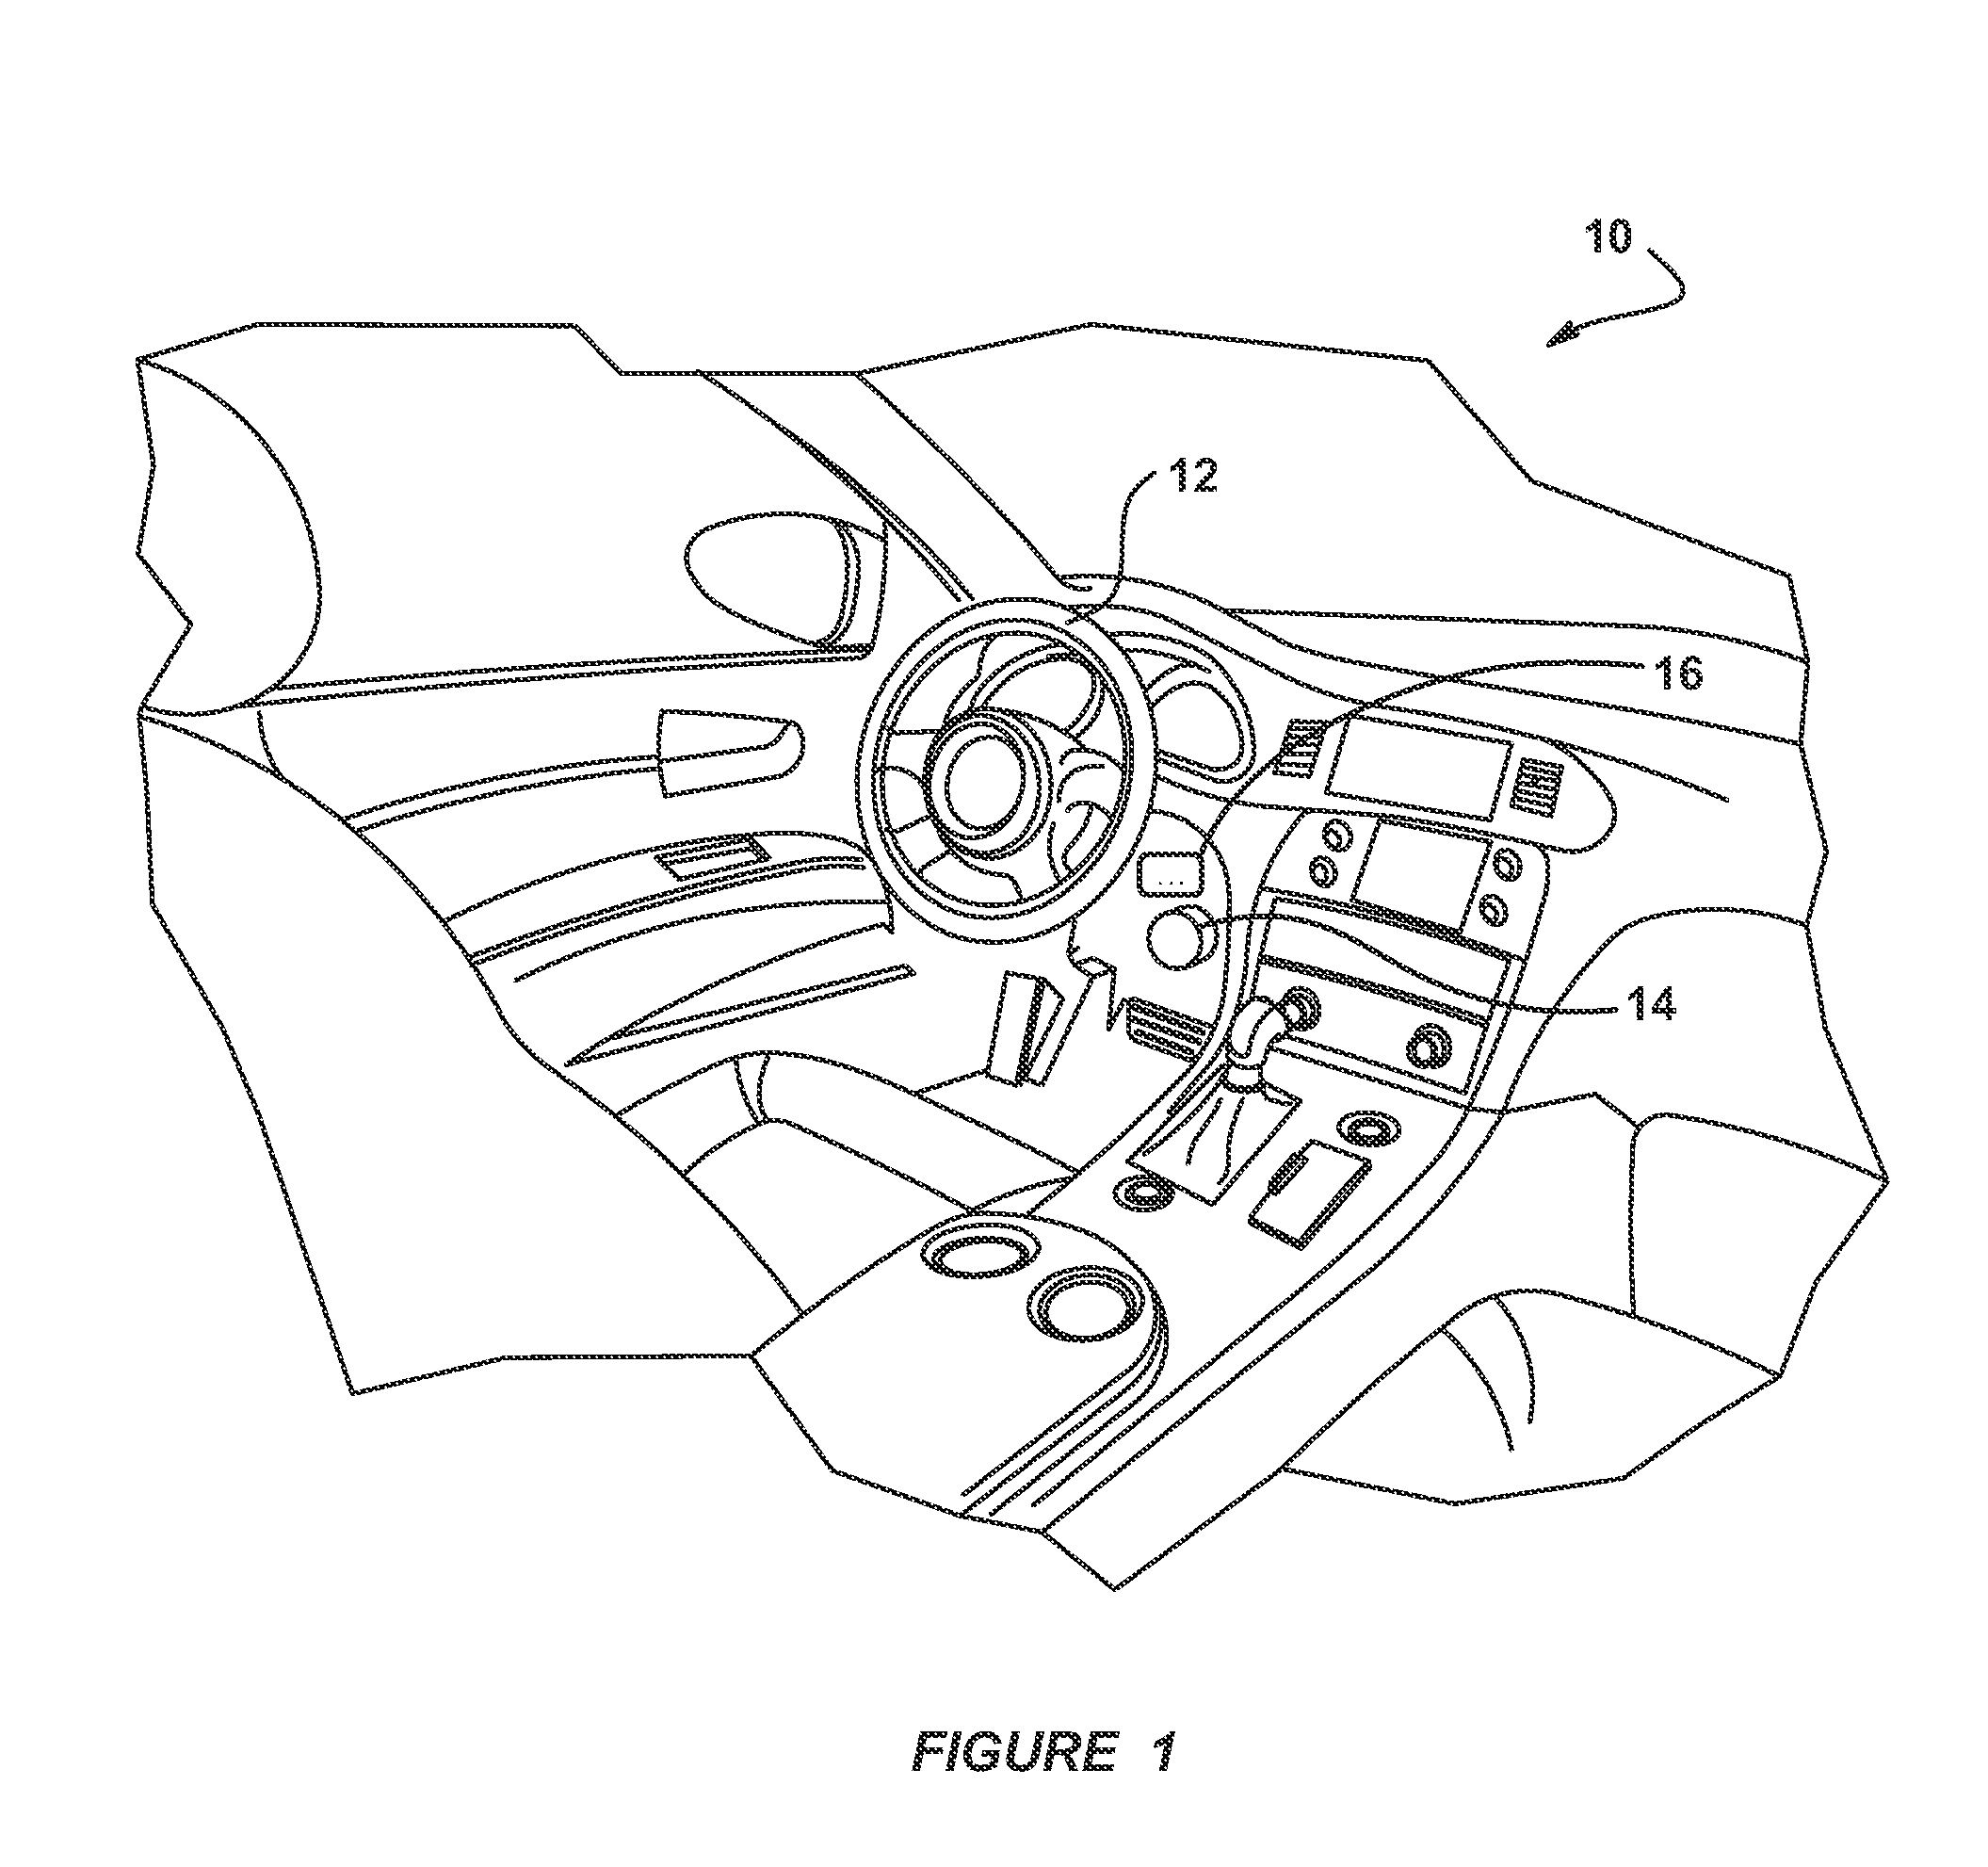 Methods of operation for plug-in wireless safety device